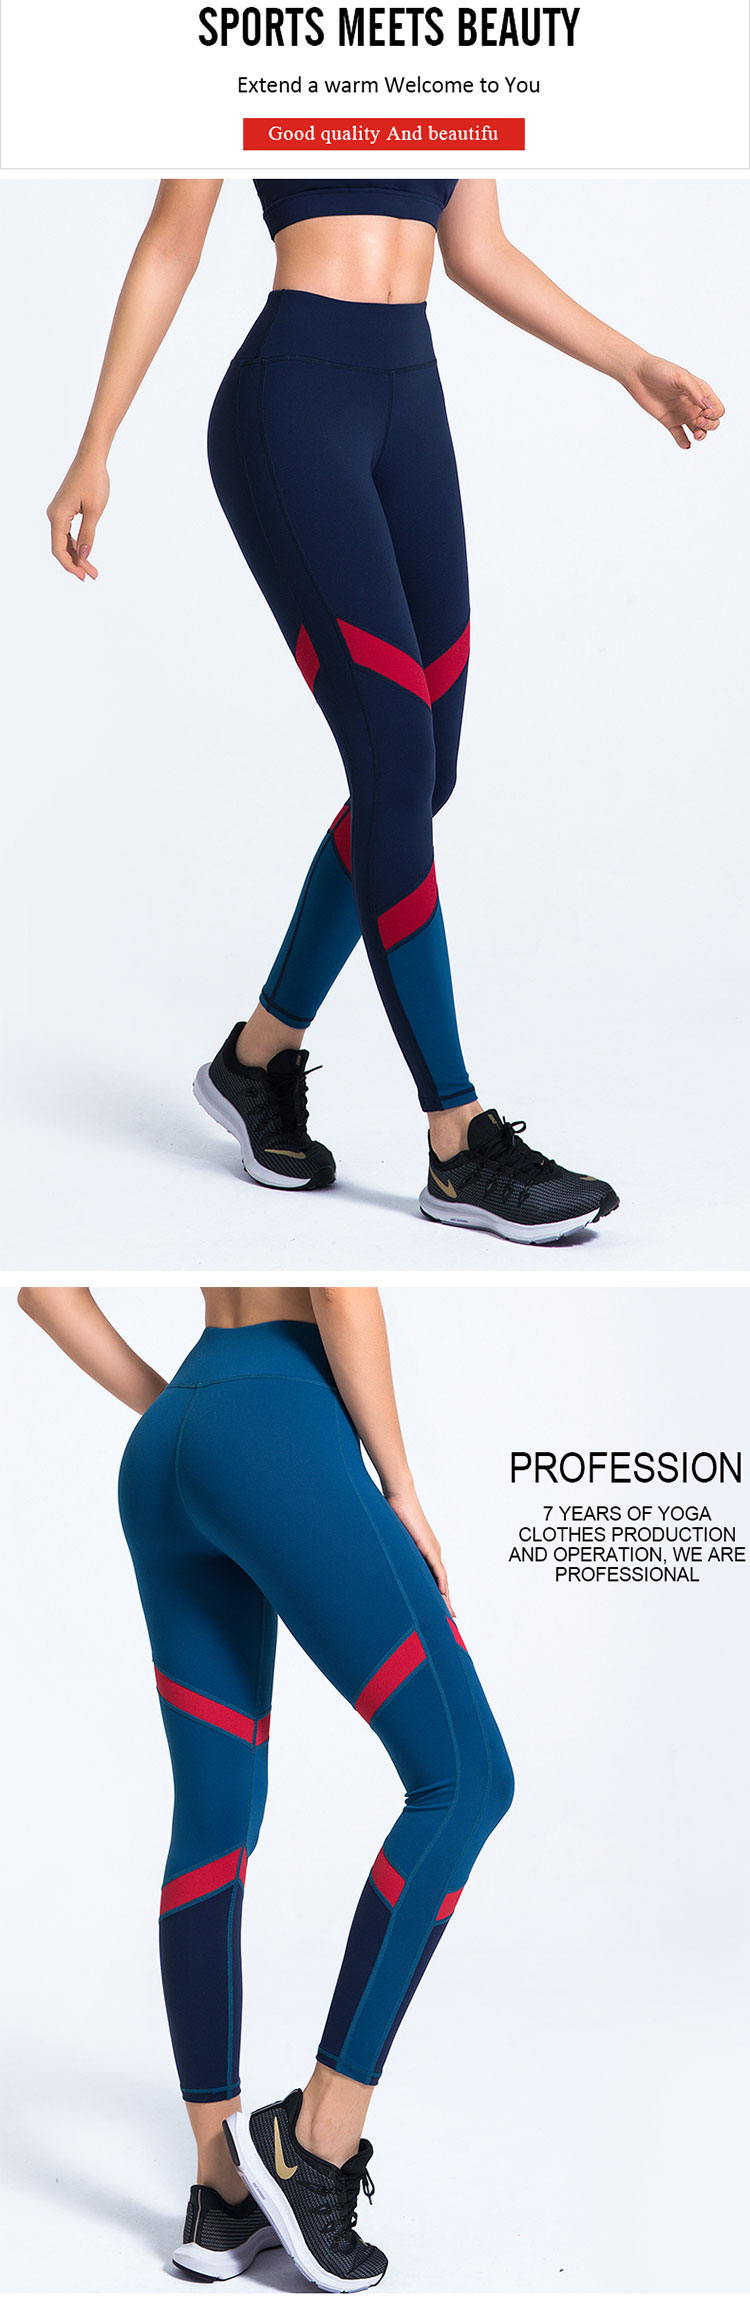 Women-wearing-yoga-pants-have-replaced-last-season's-sport-pants.-Compared-to-the-above-briefs,-these-shorts